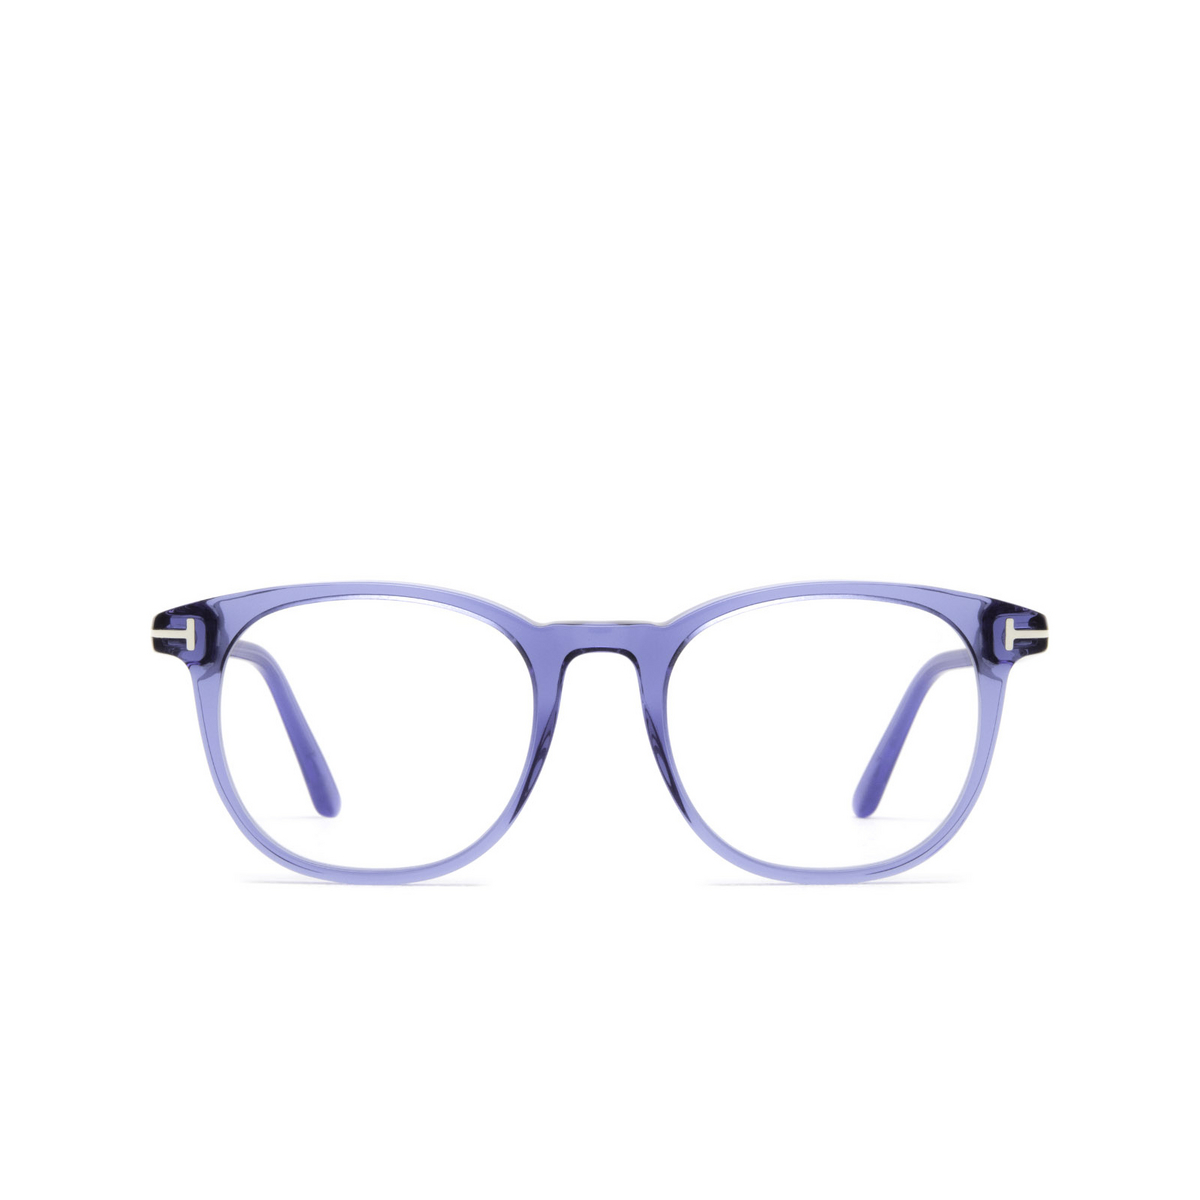 Tom Ford® Round Eyeglasses: FT5754-B color Blue 090 - front view.